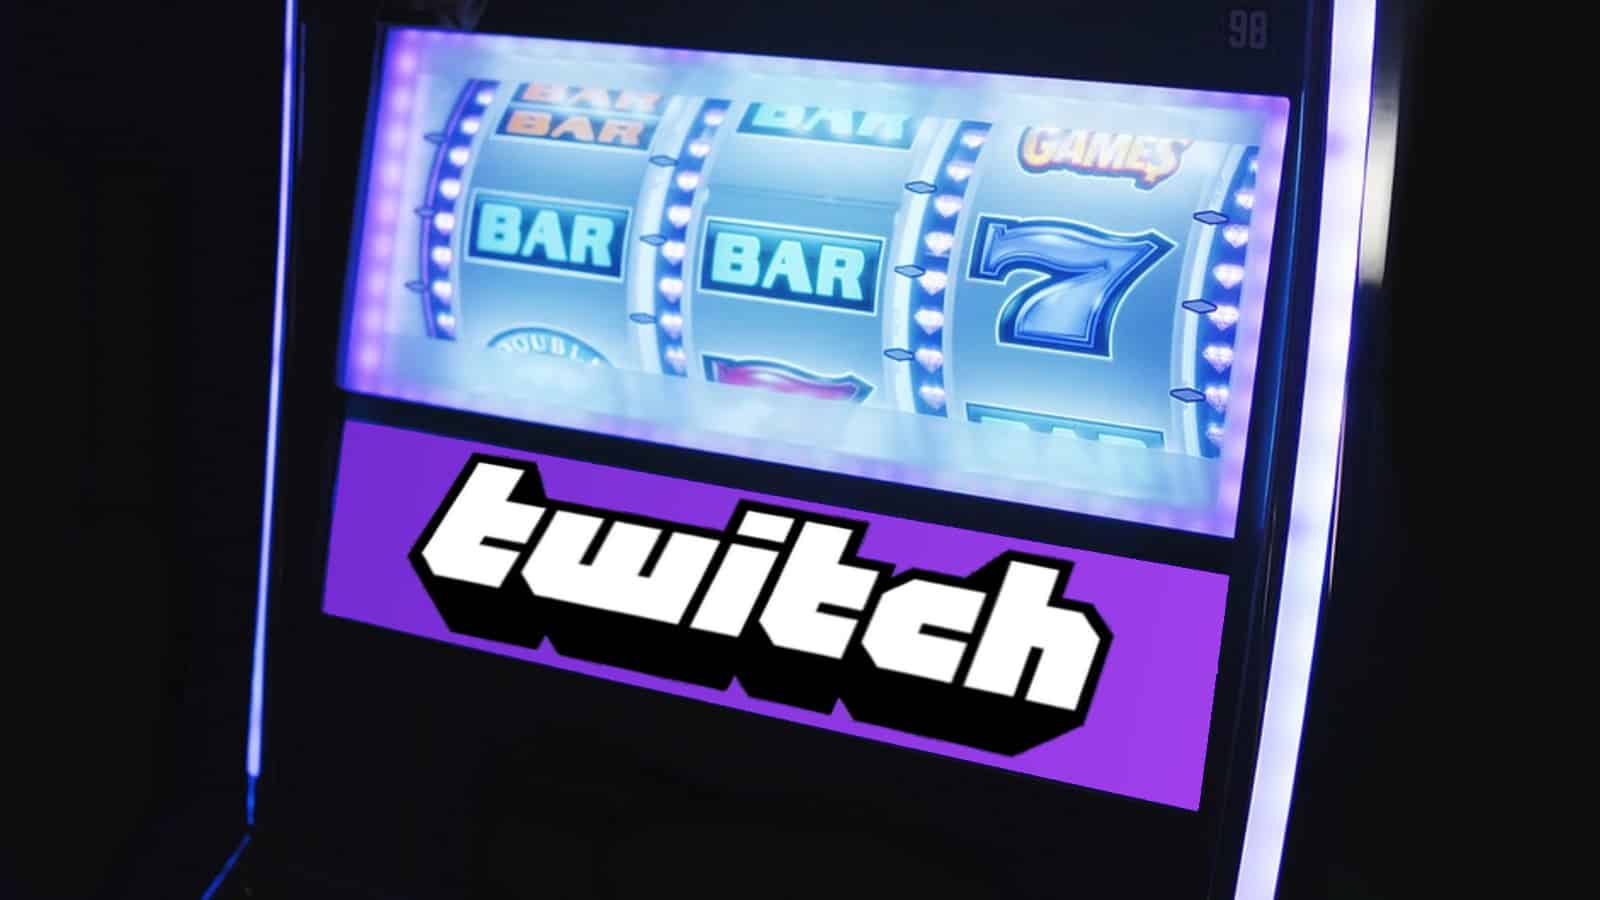 Twitch to ban users from streaming unlicensed gambling content